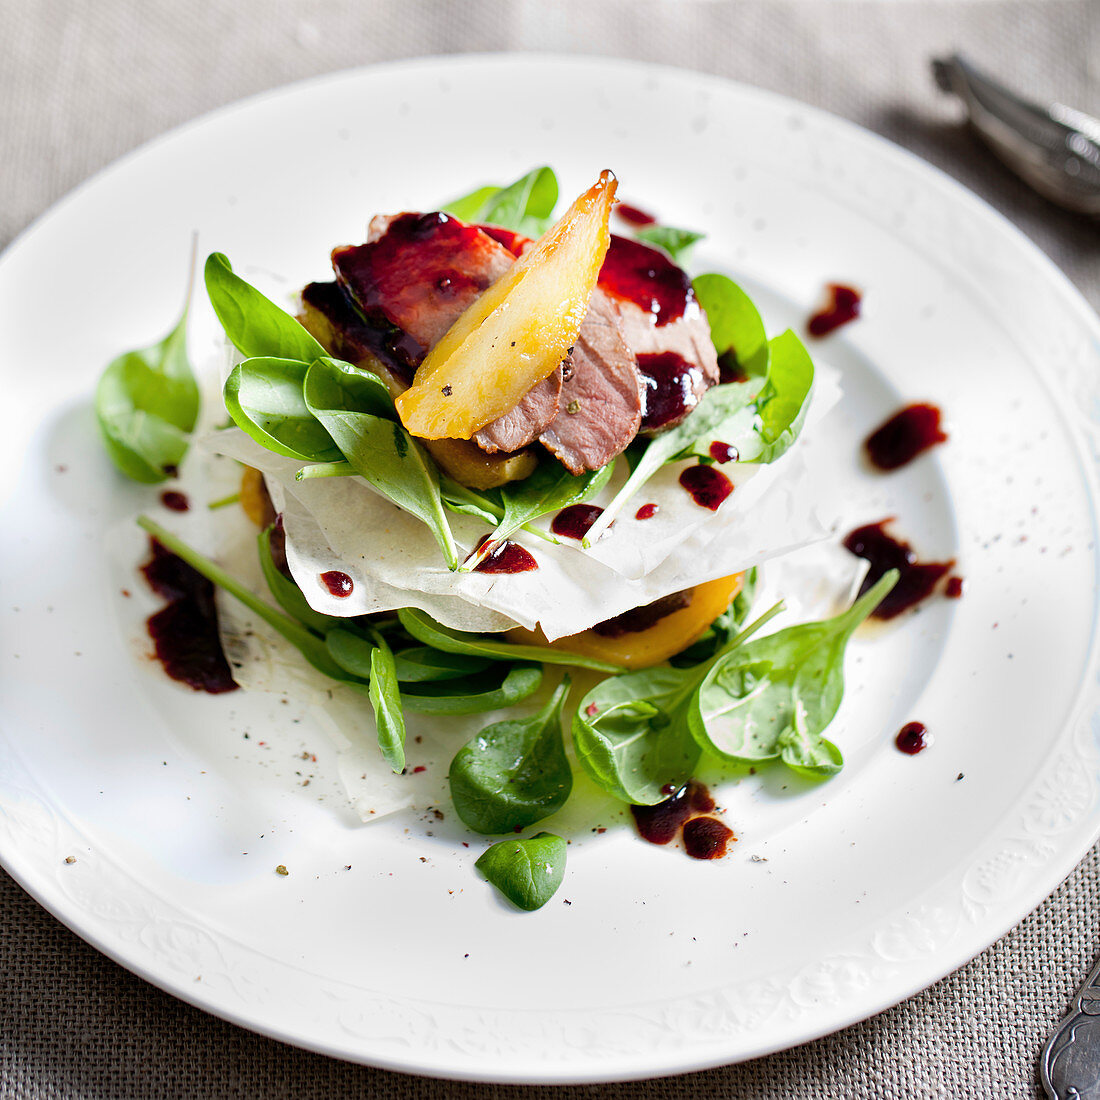 Duck breast roasted with pear, salad on a white plate